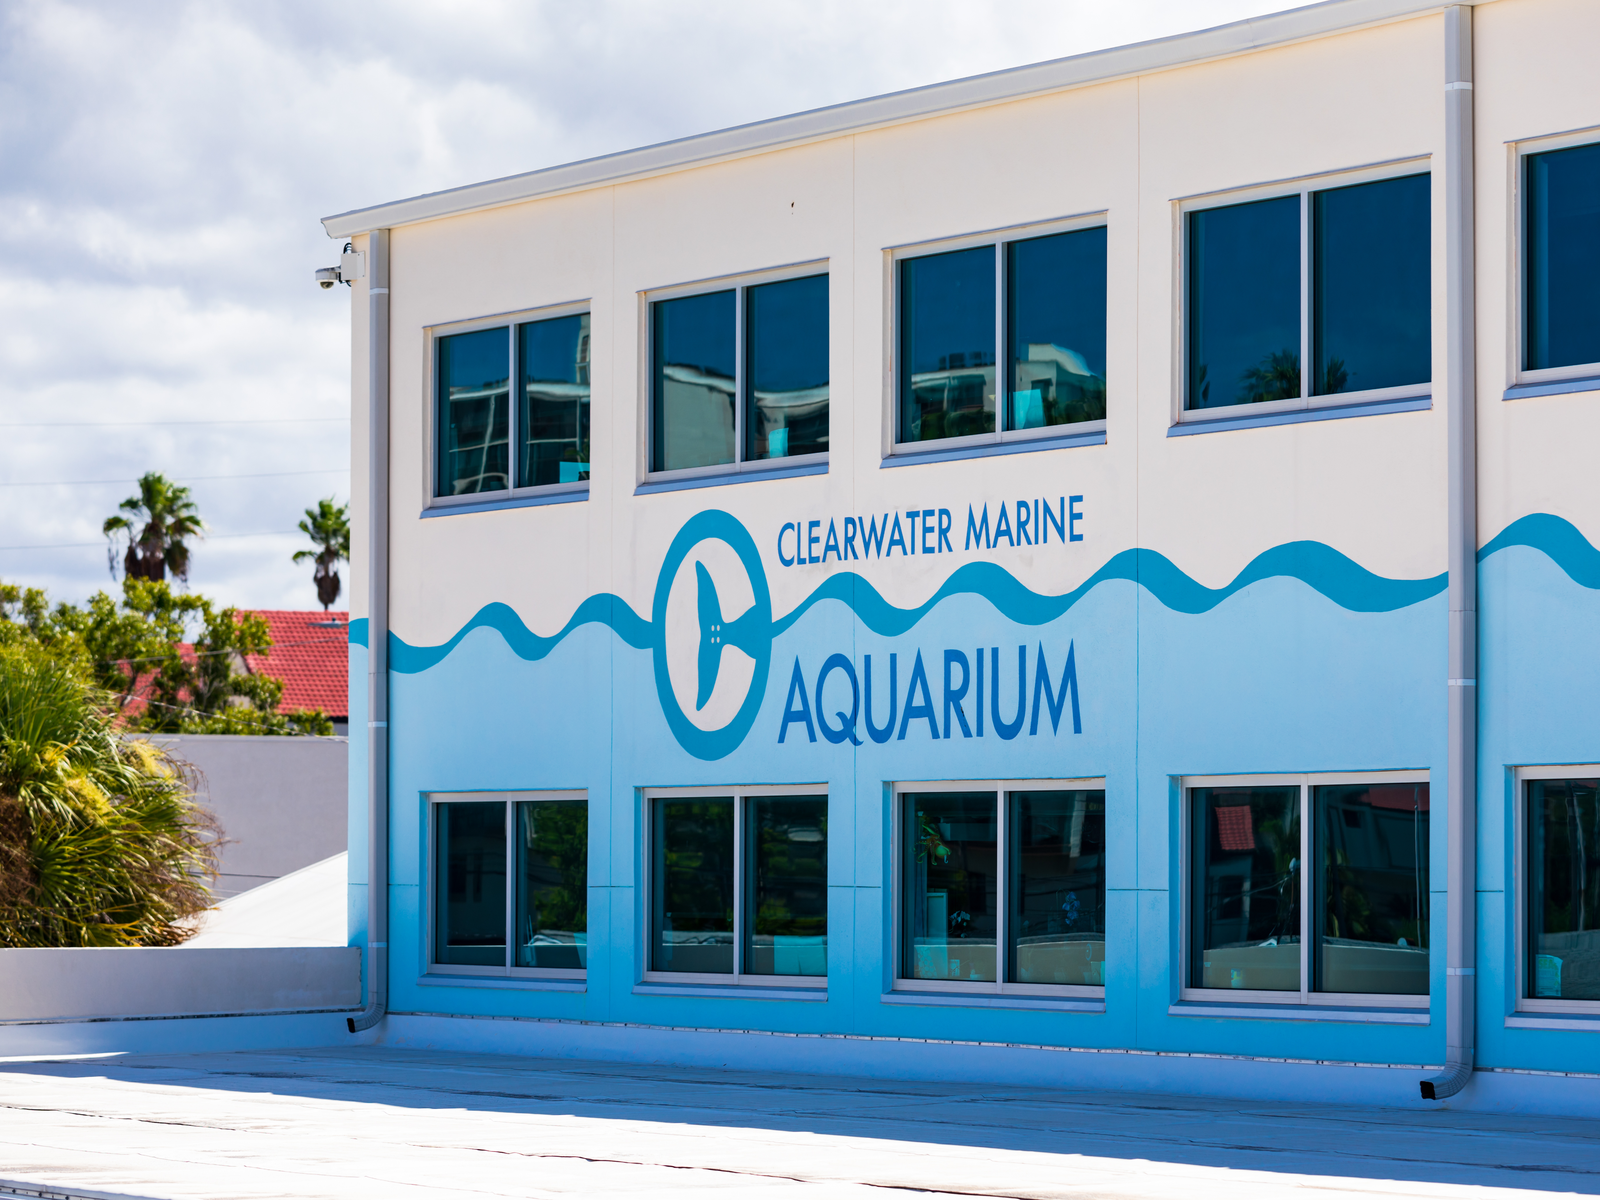 A multiple glass window building at Clearwater Marine Aquarium, one of the best aquariums in Florida, painted with a blue wave pattern 